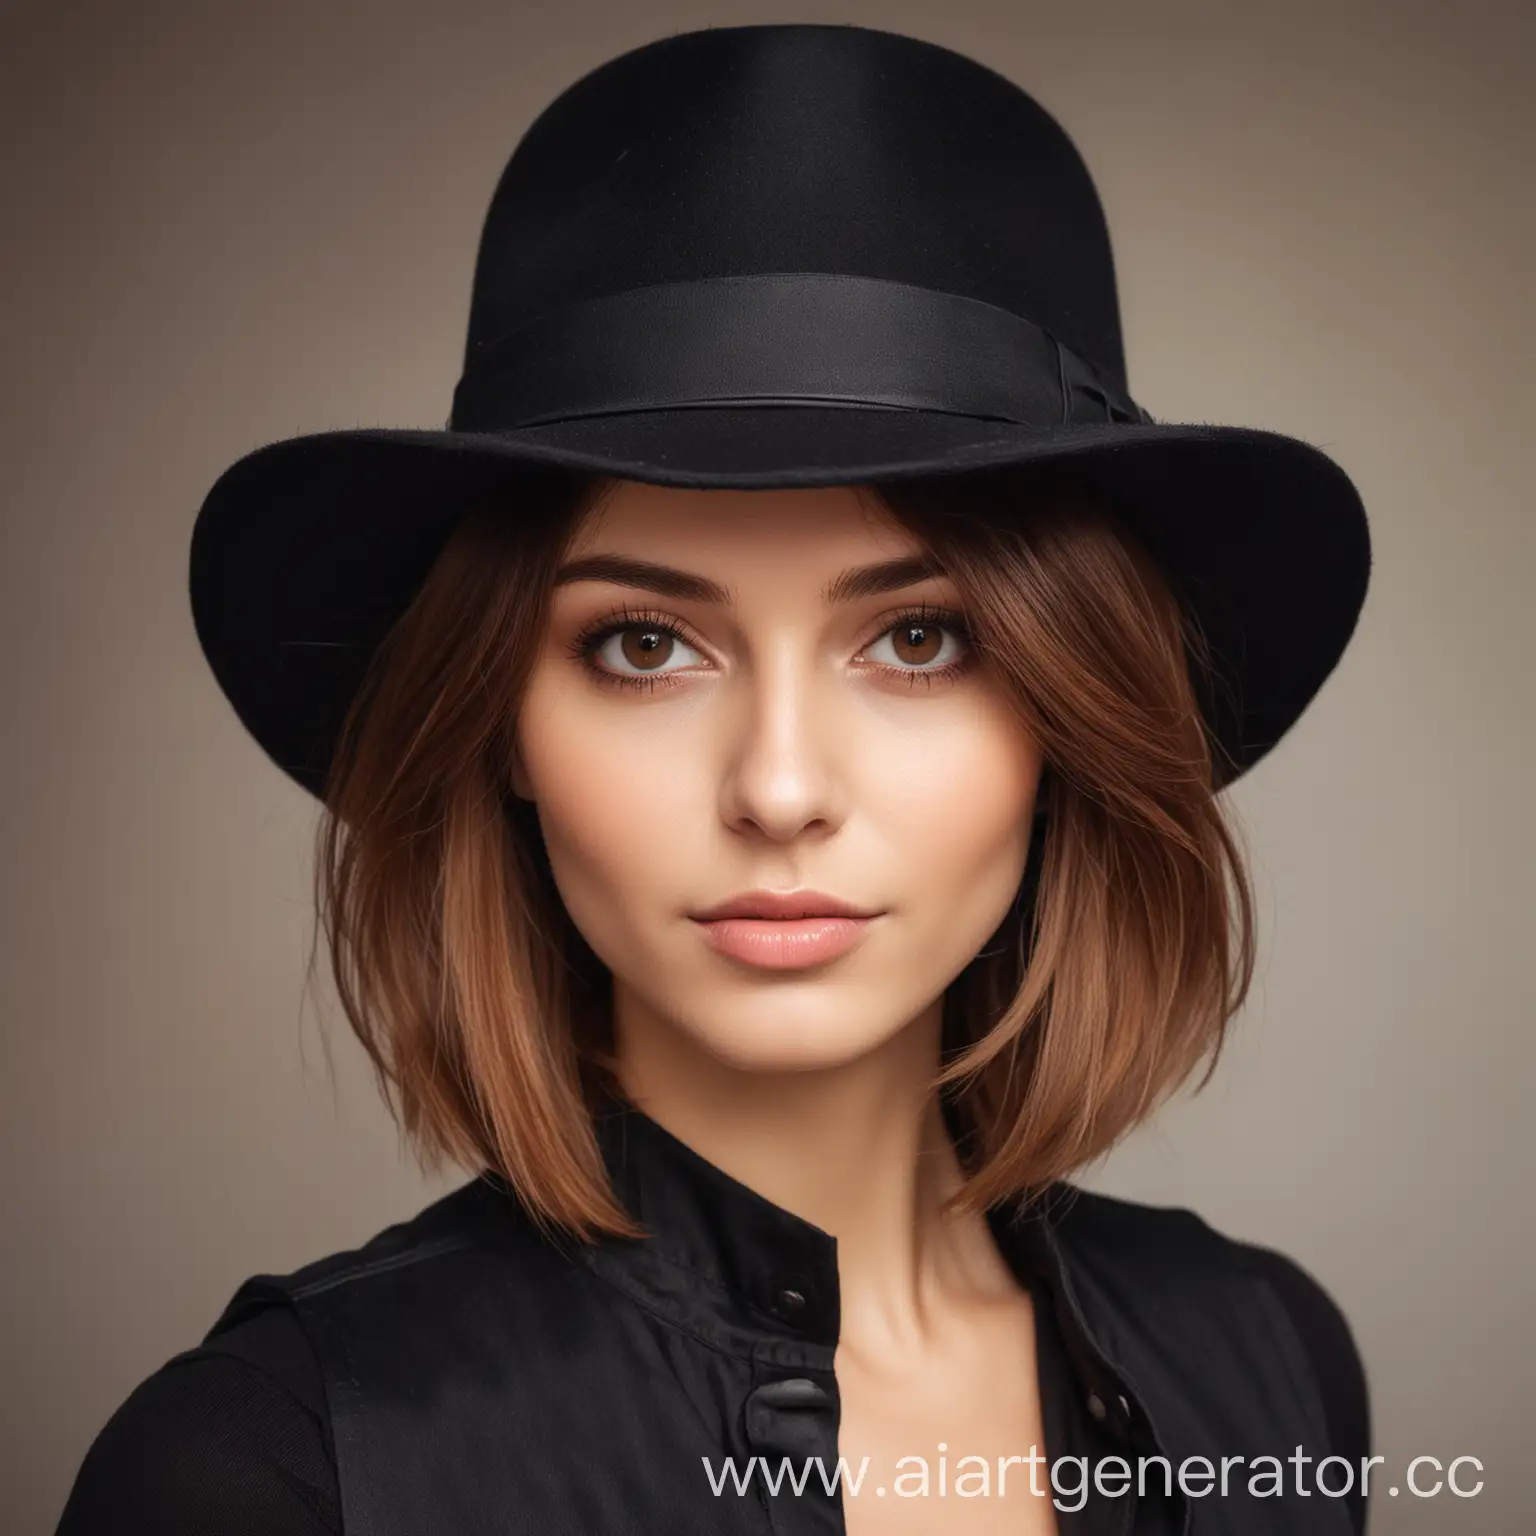 Stylish-Lady-with-Chestnut-Hair-and-Black-Hat